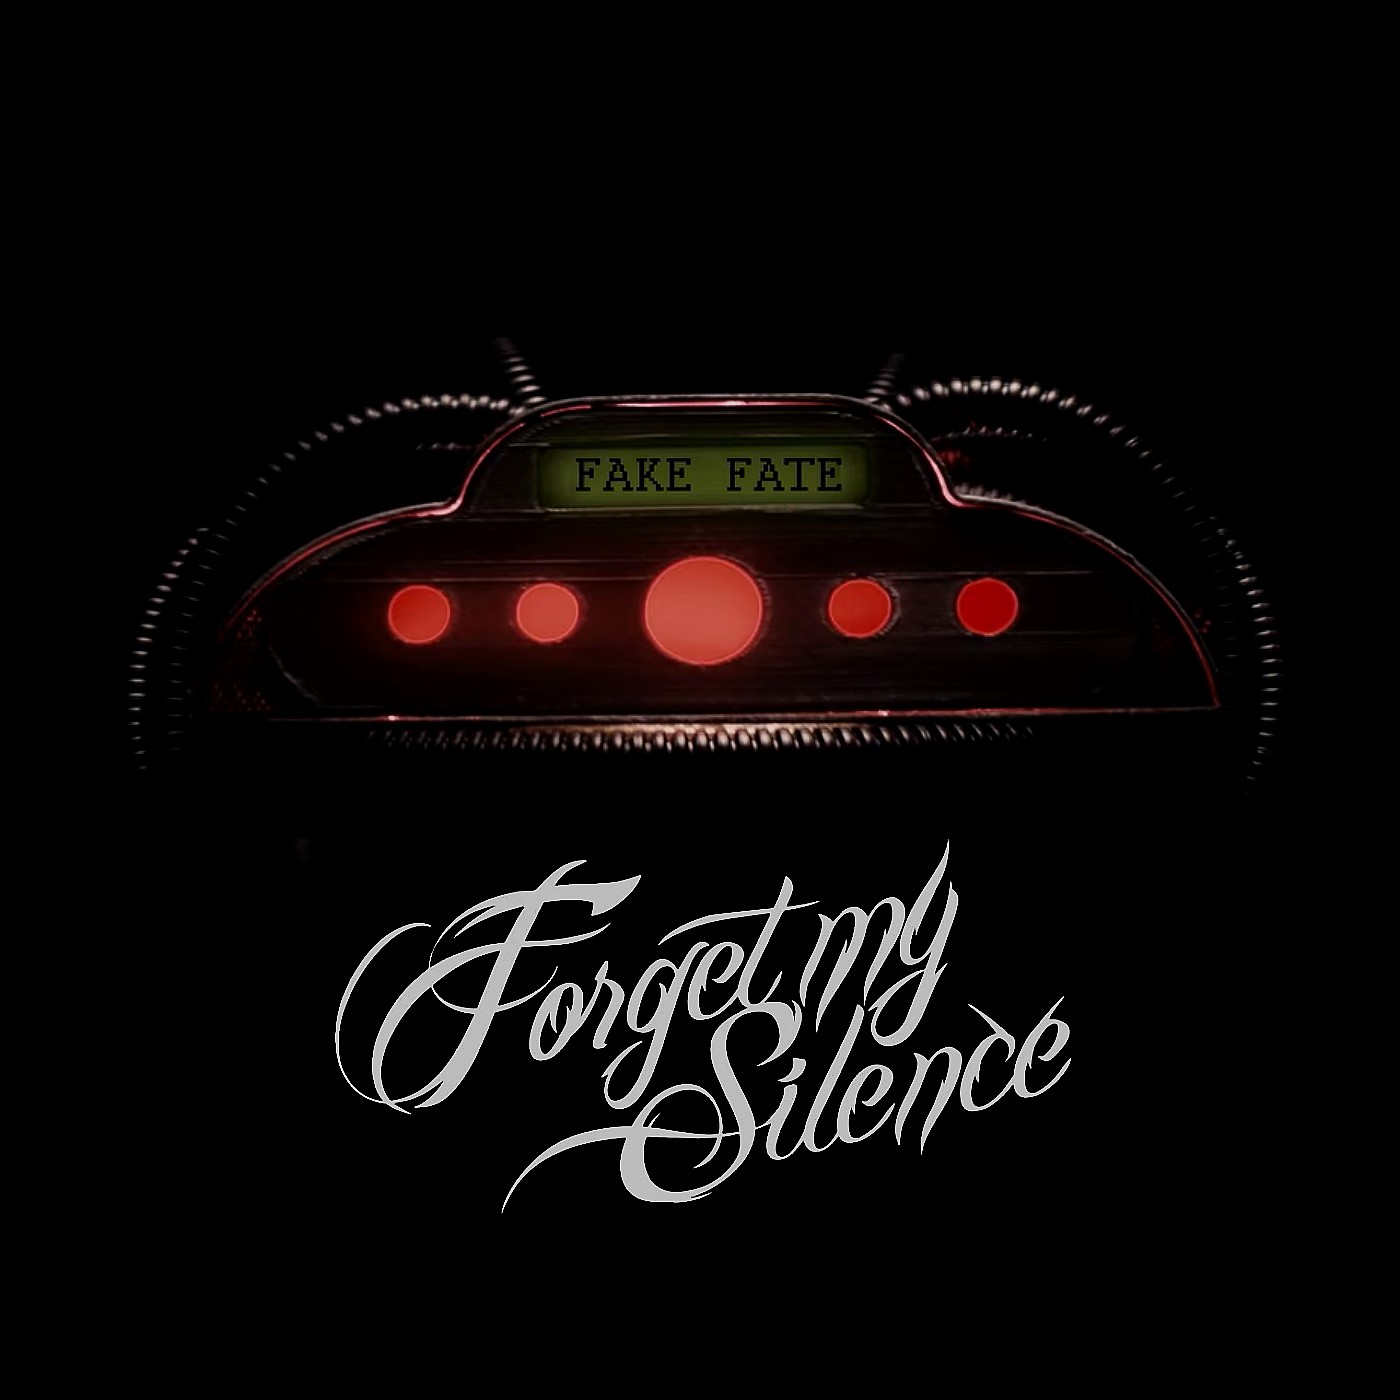 Forget My Silence “Fake Fate” single artwork